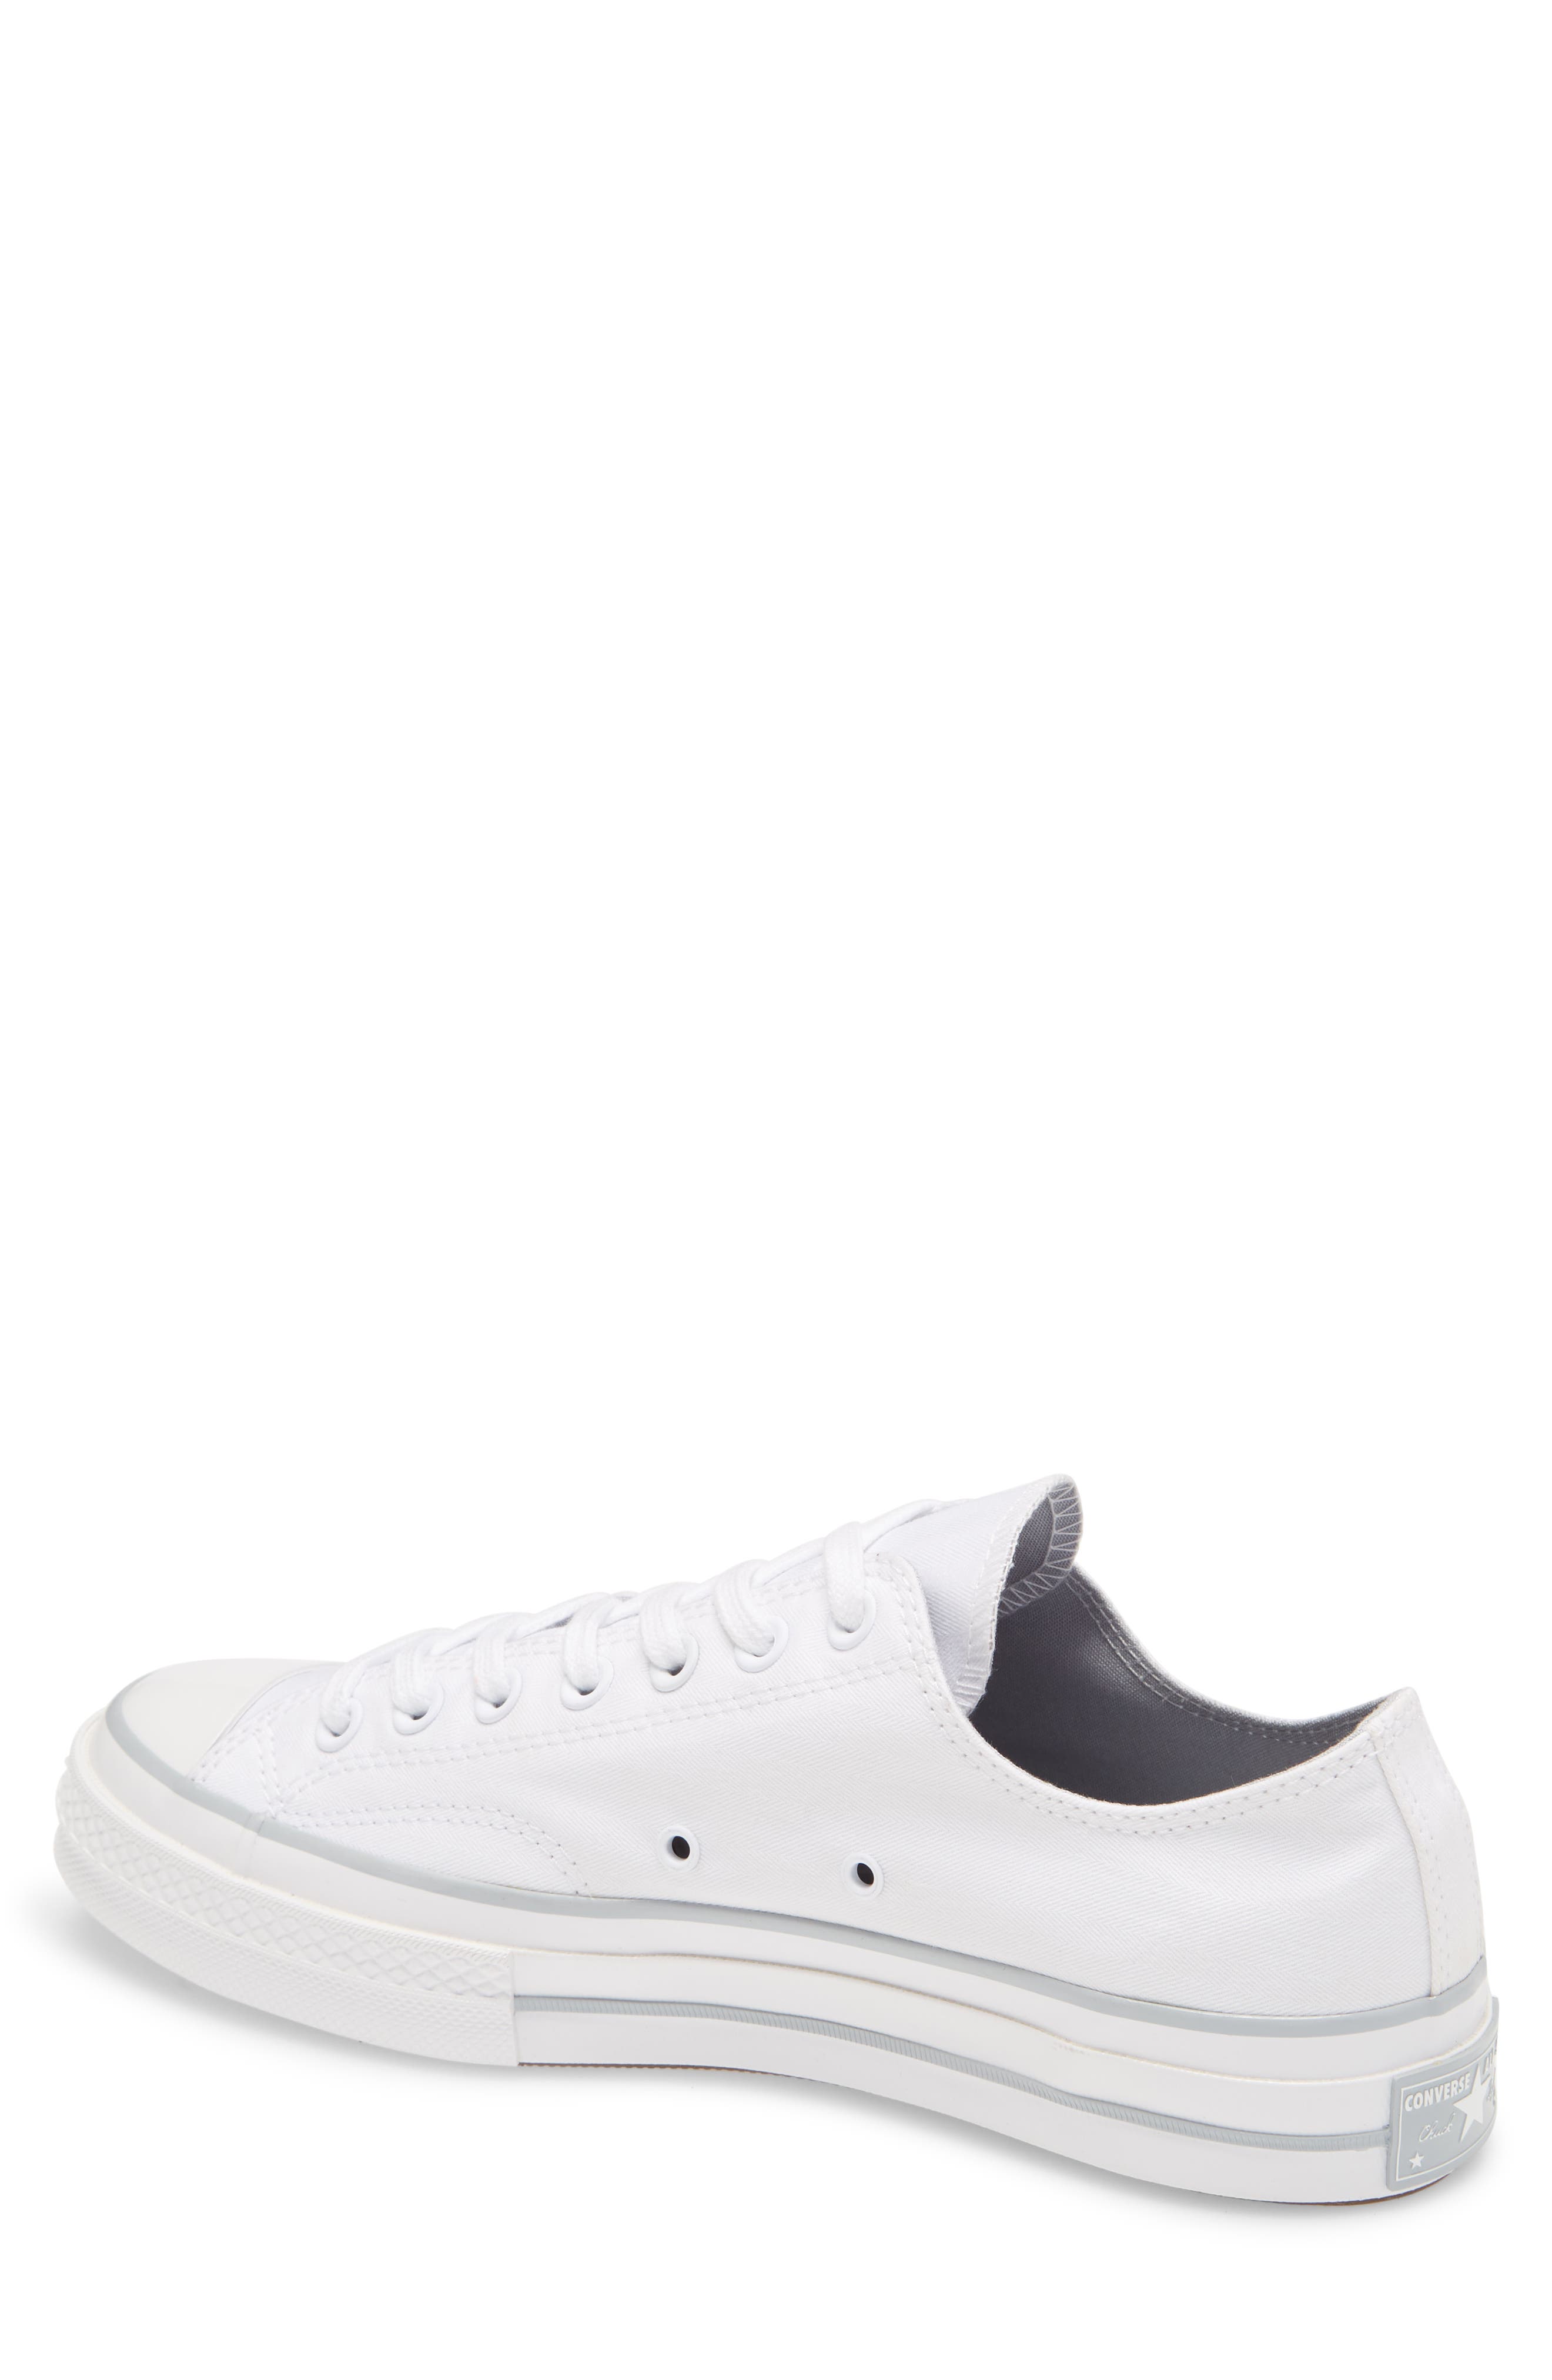 chuck taylor all star 70 low top